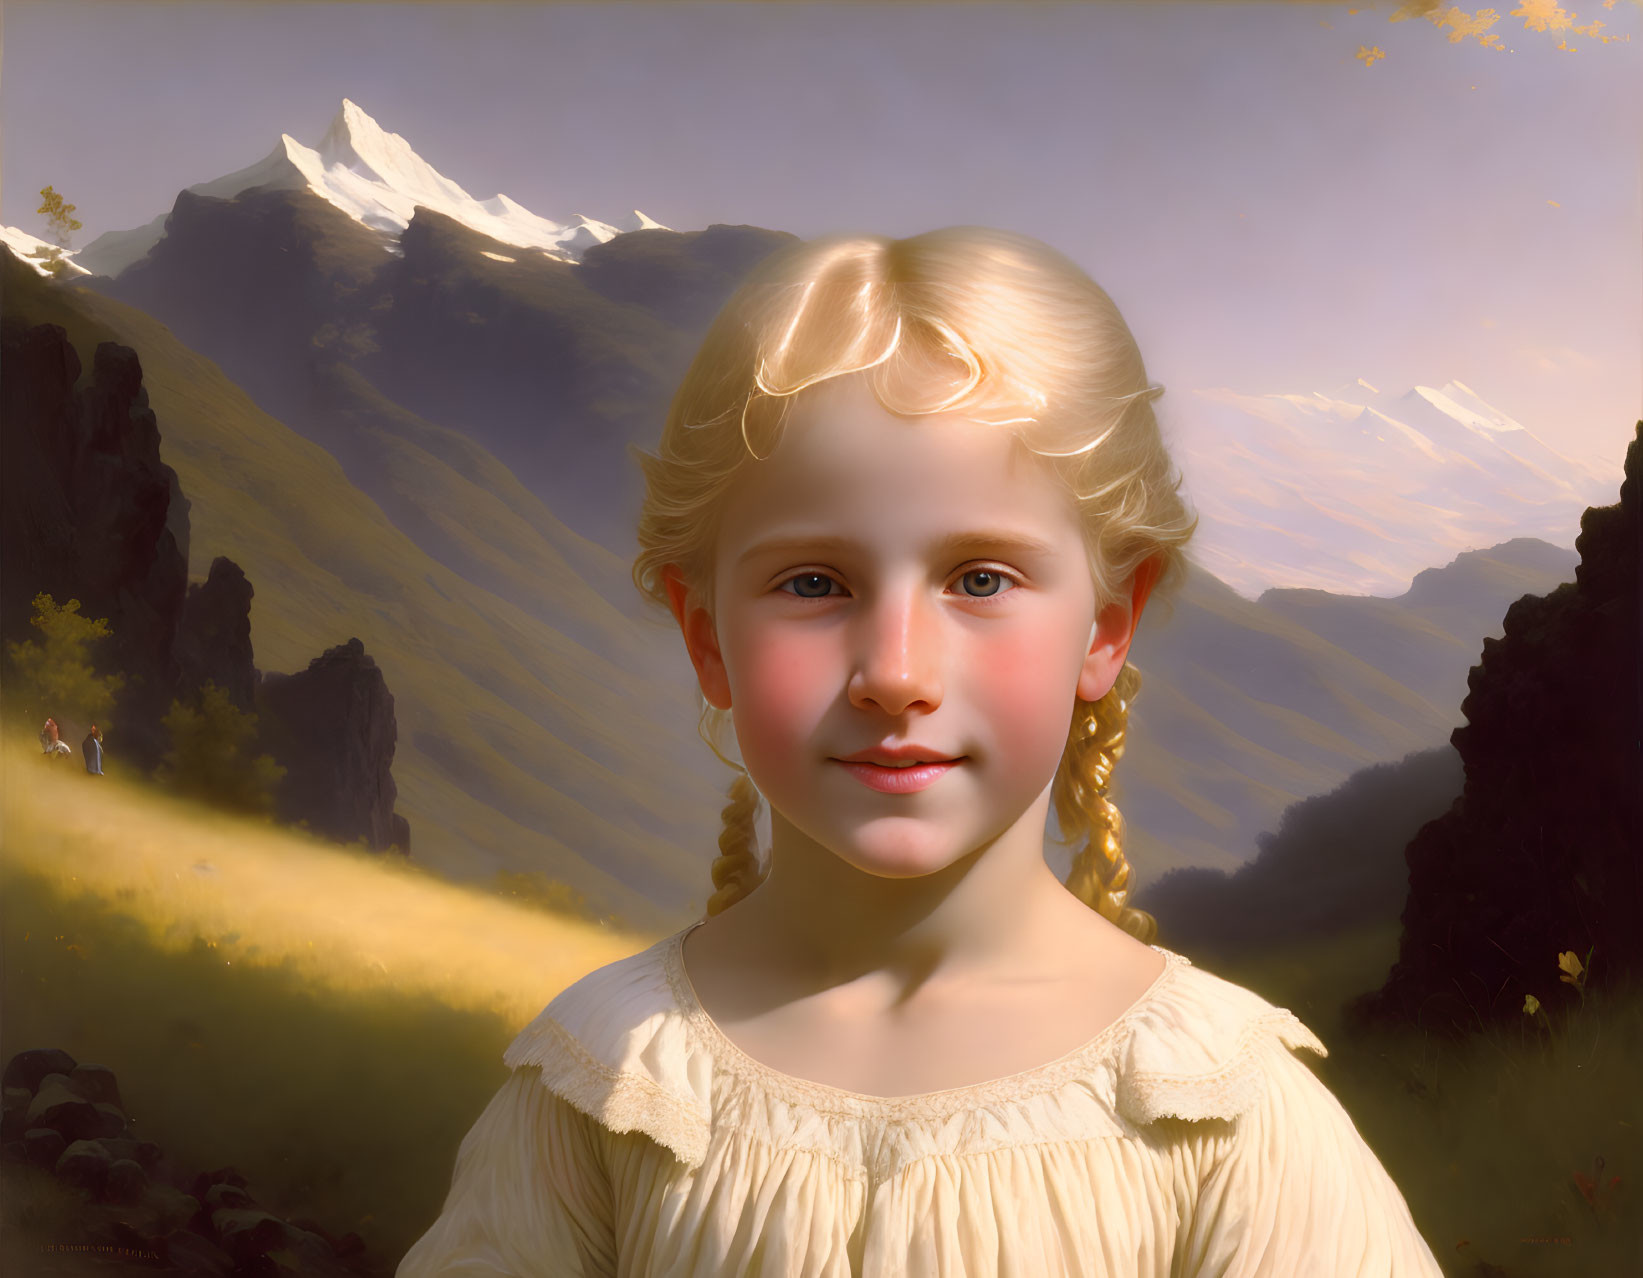 Blonde girl in cream dress smiling with mountain backdrop